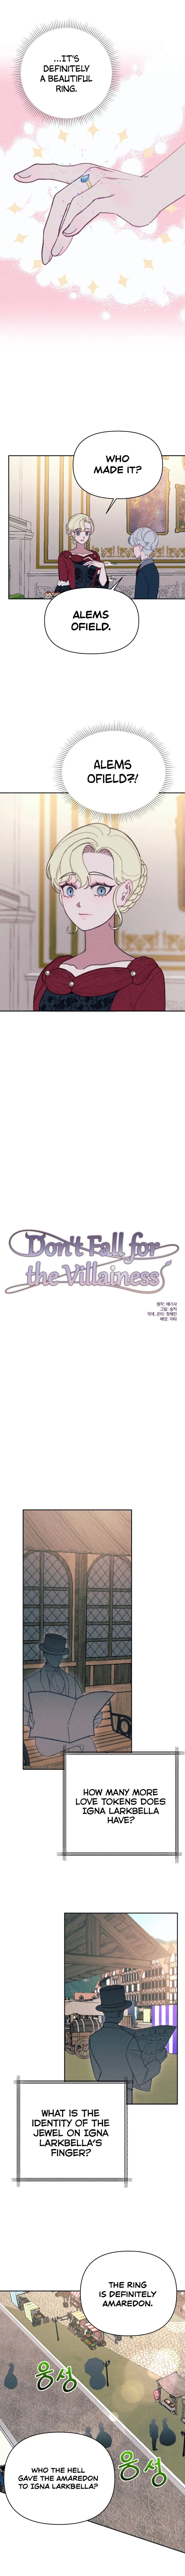 Don’t Fall In Love With The Villainess chapter 24